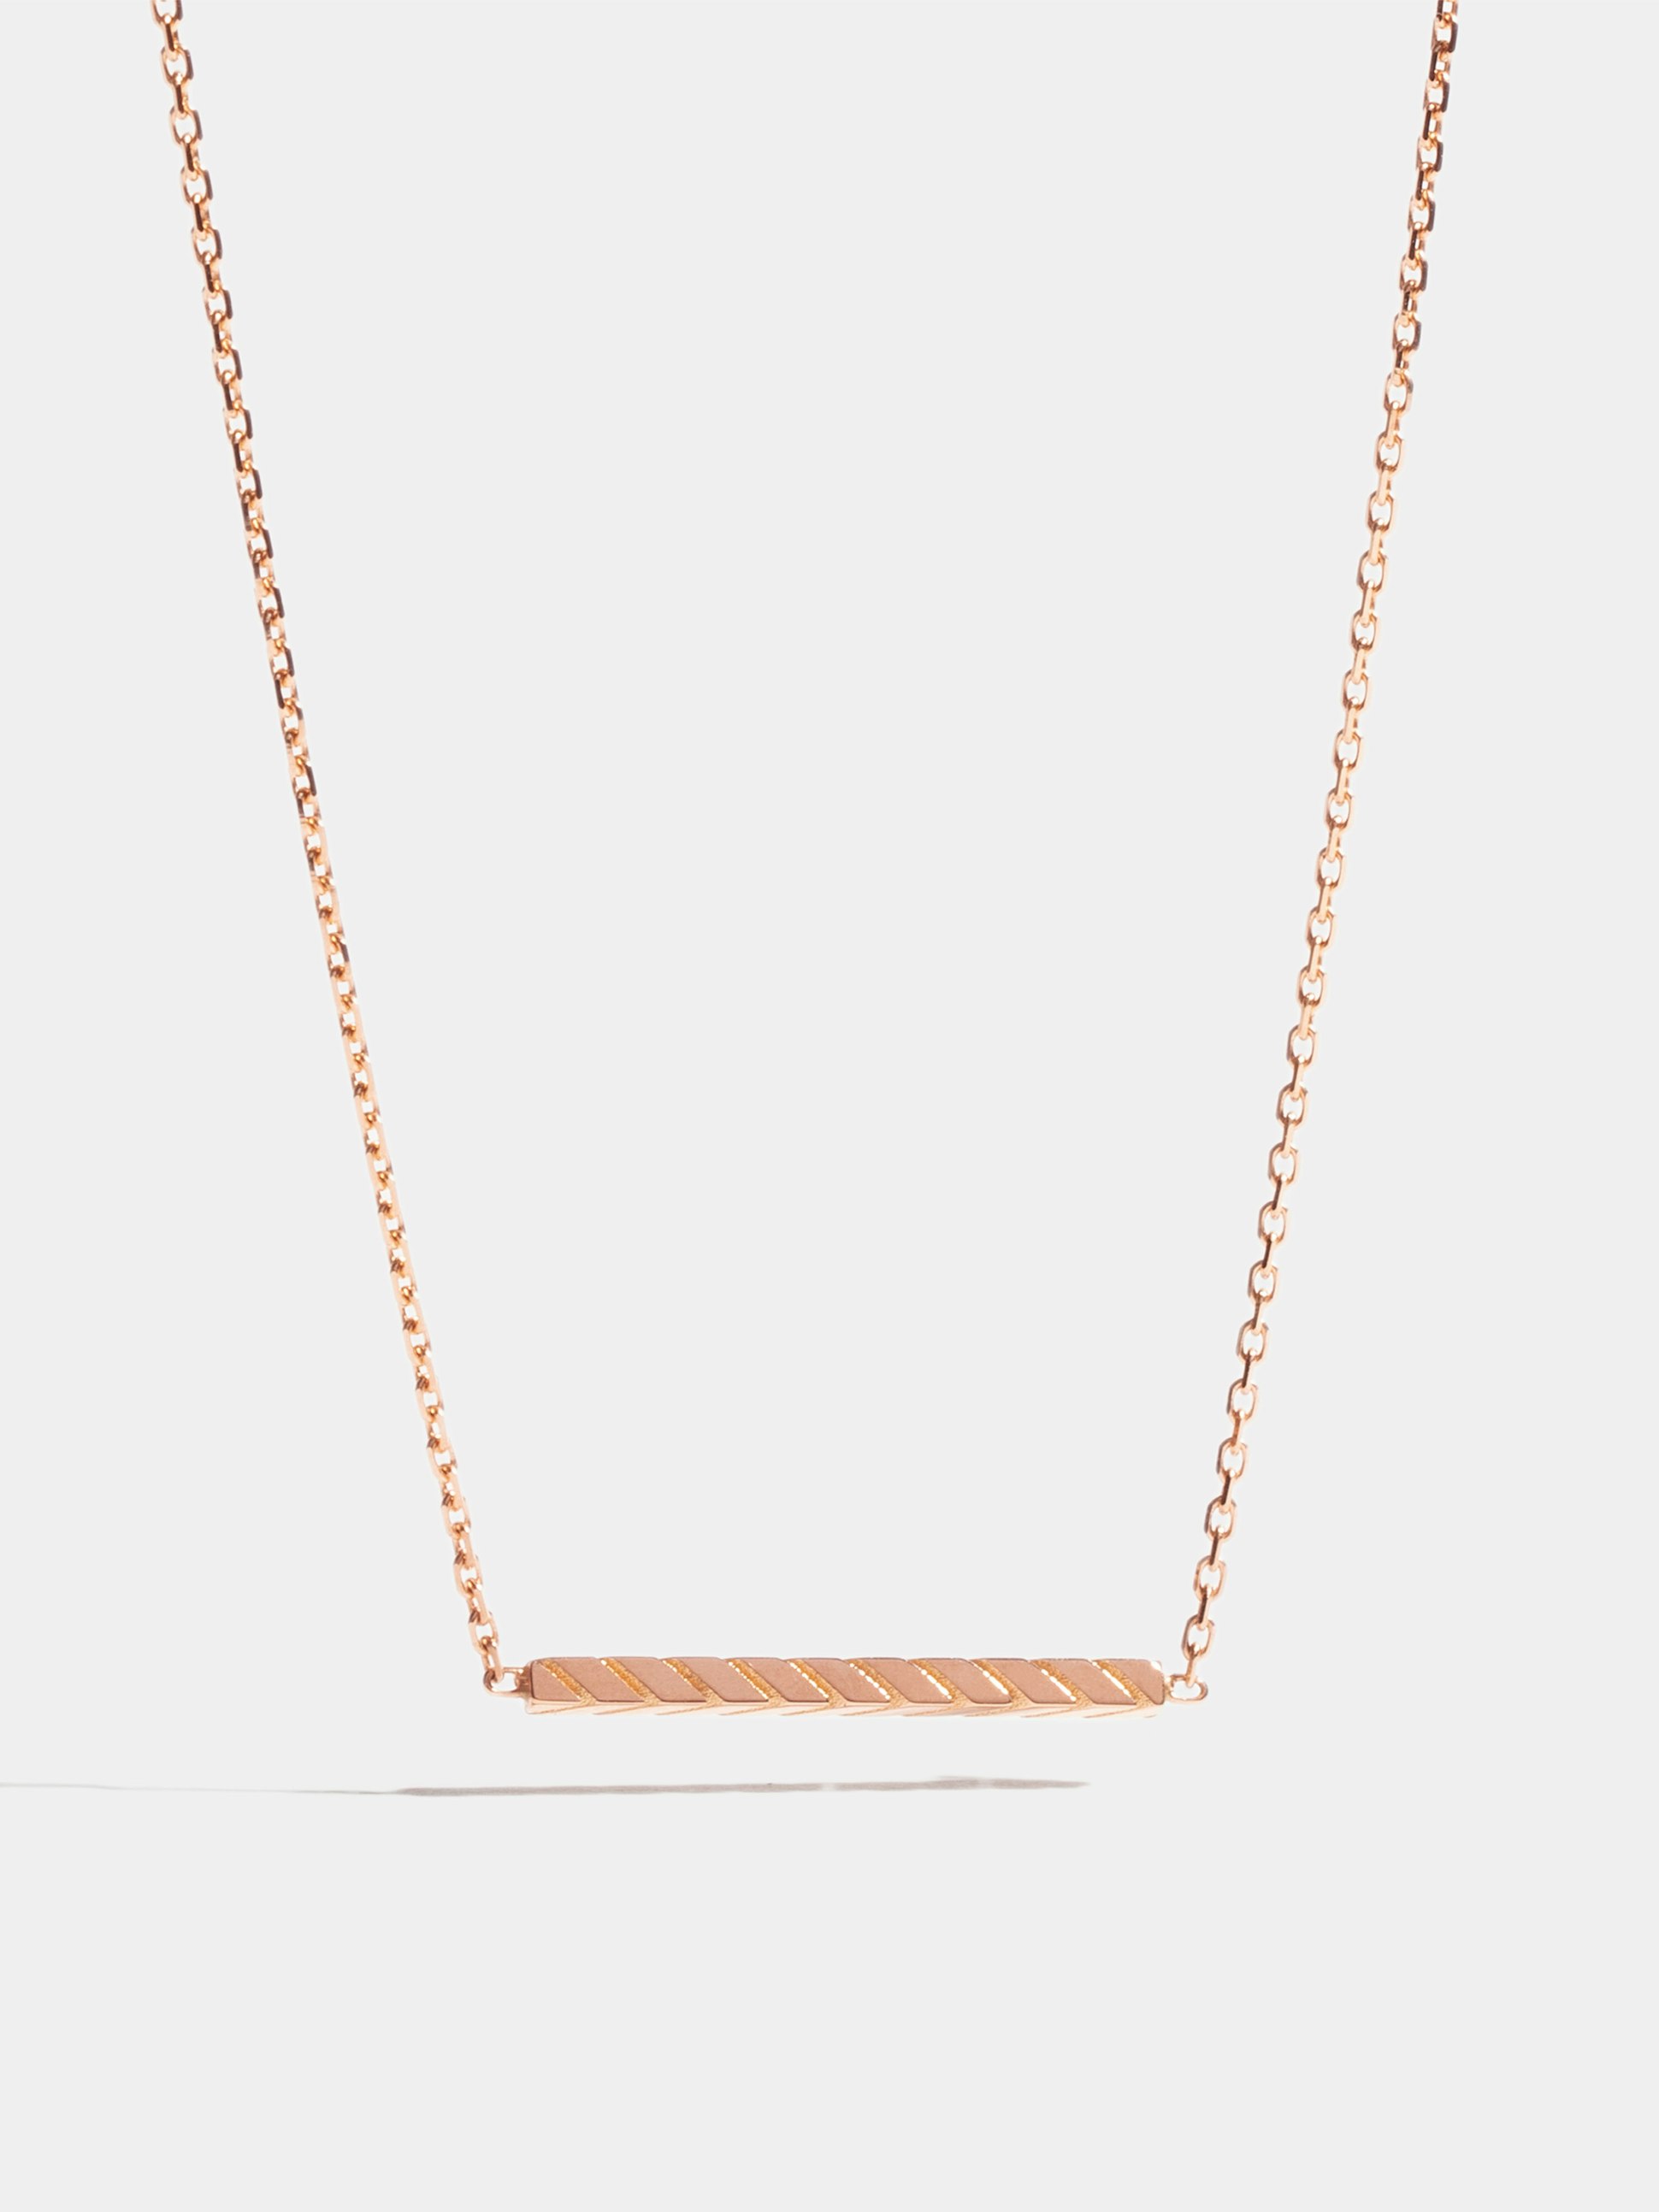 Anagramme grooved motif in rose gold 18k Fairmined ethical, on 42 cm chain